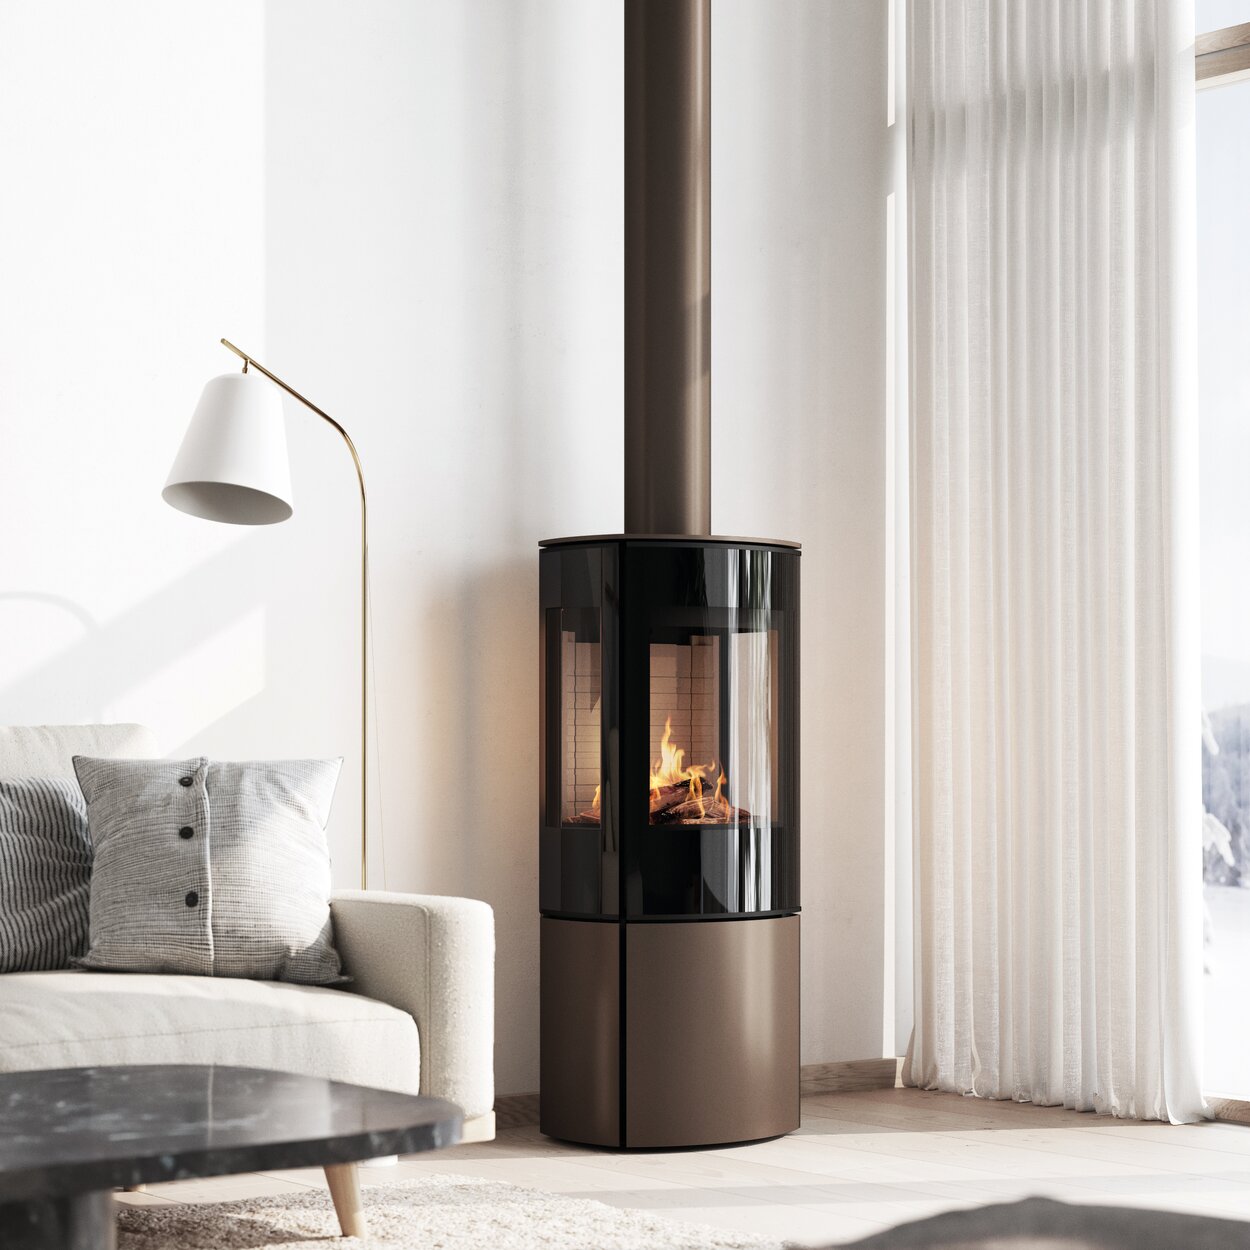 Gas stove CARO 110 in mocha with glass door and side window in a cosy living room